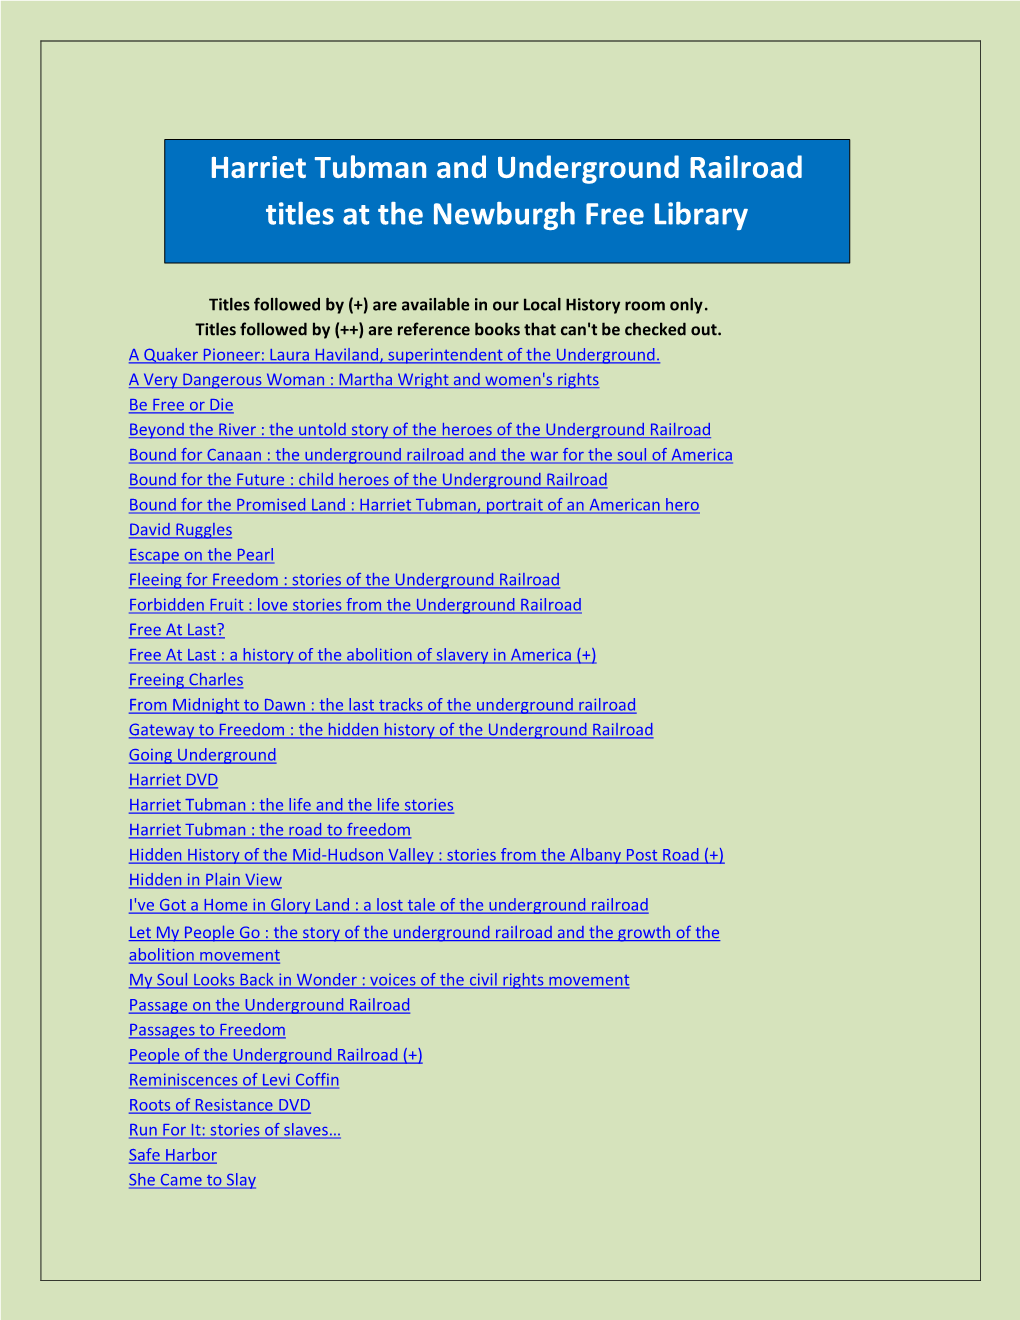 Harriet Tubman and Underground Railroad Titles at the Newburgh Free Library